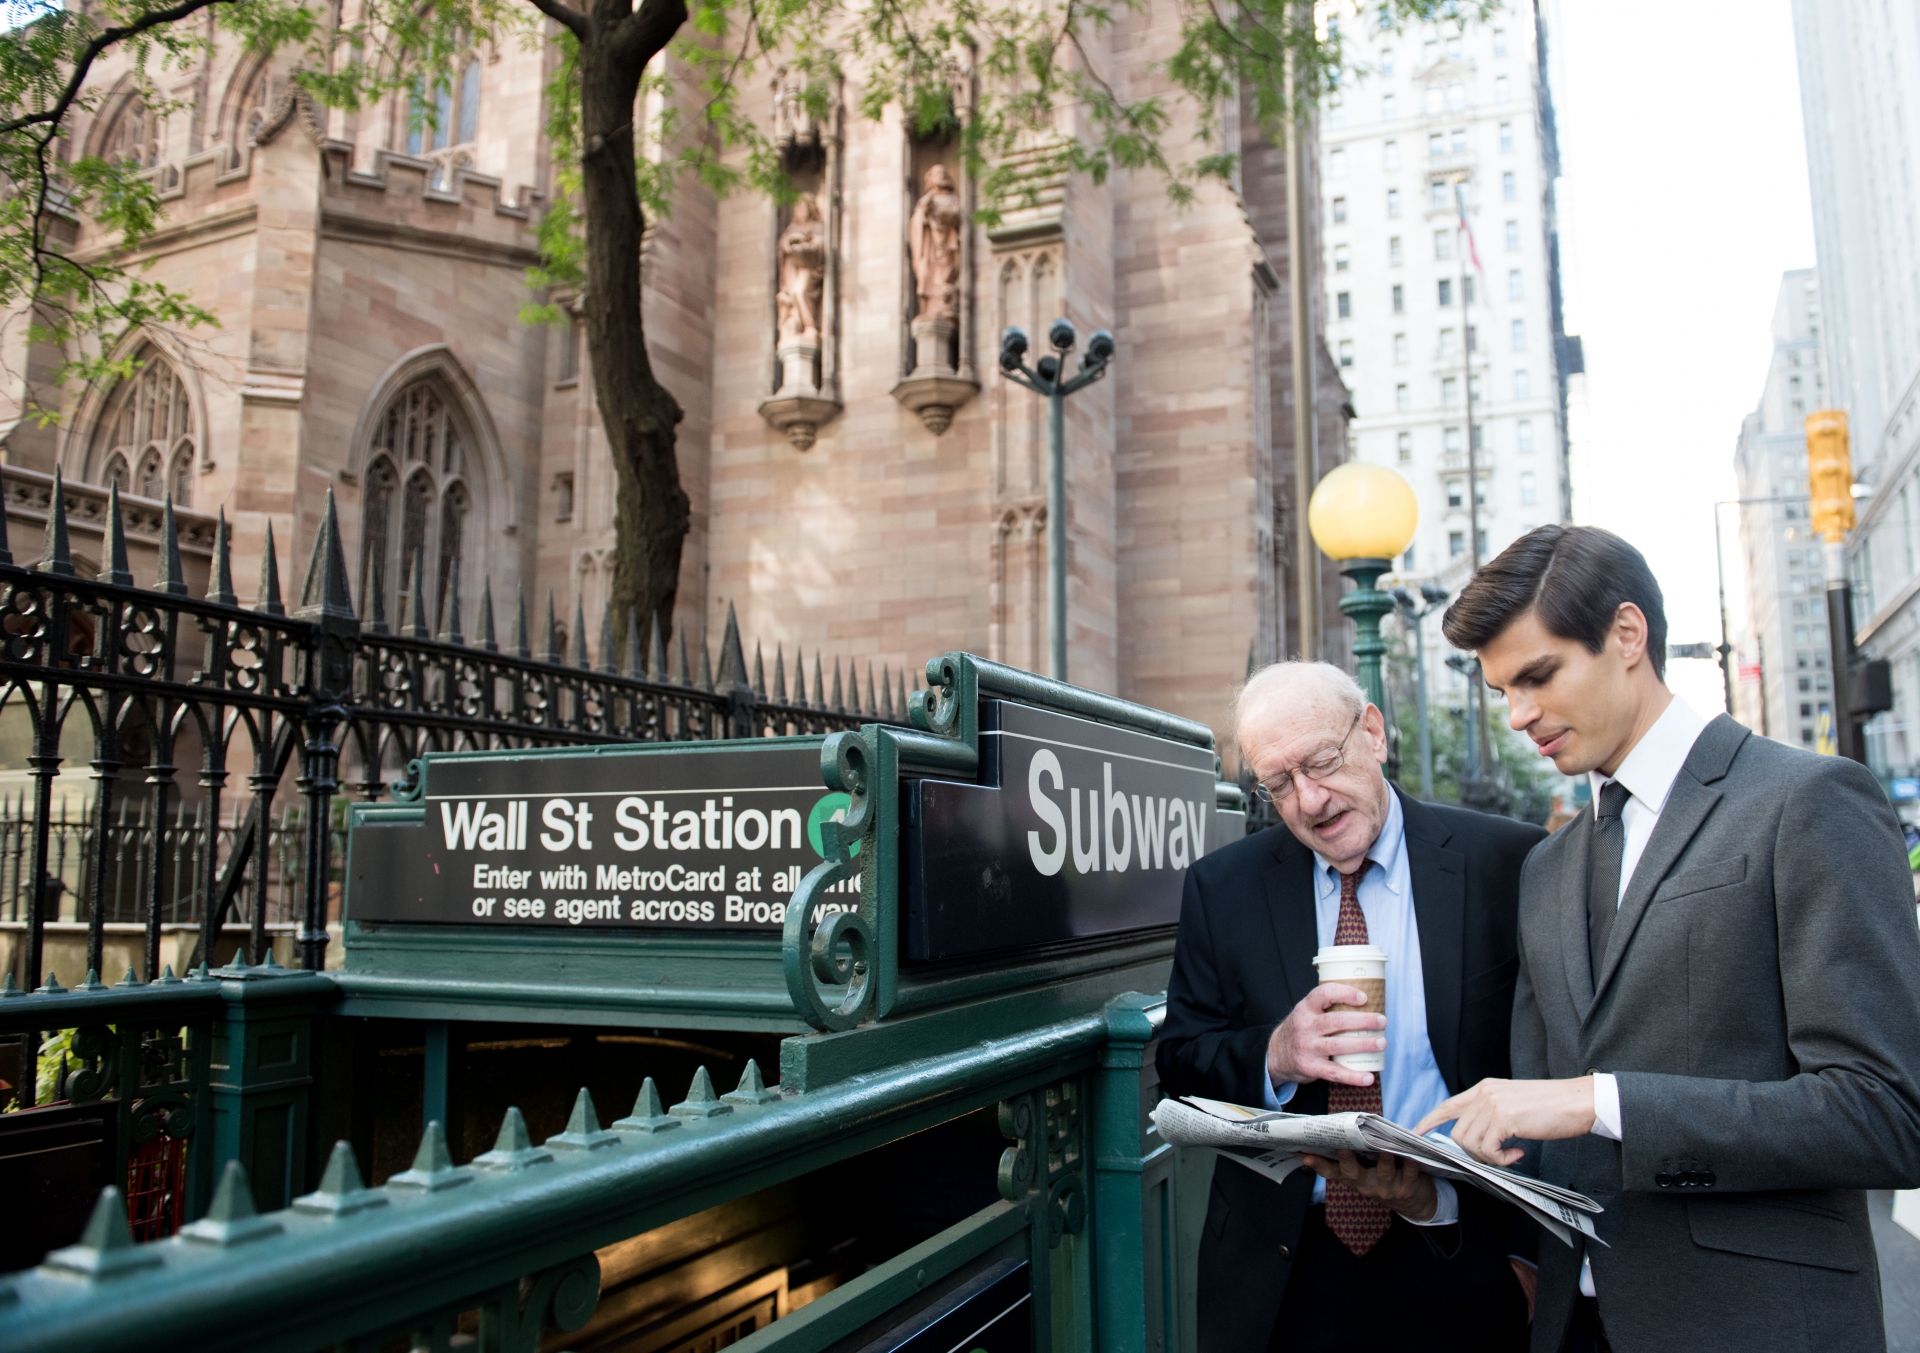 Two guys in a suit on the Wall Street at the subway station entrance